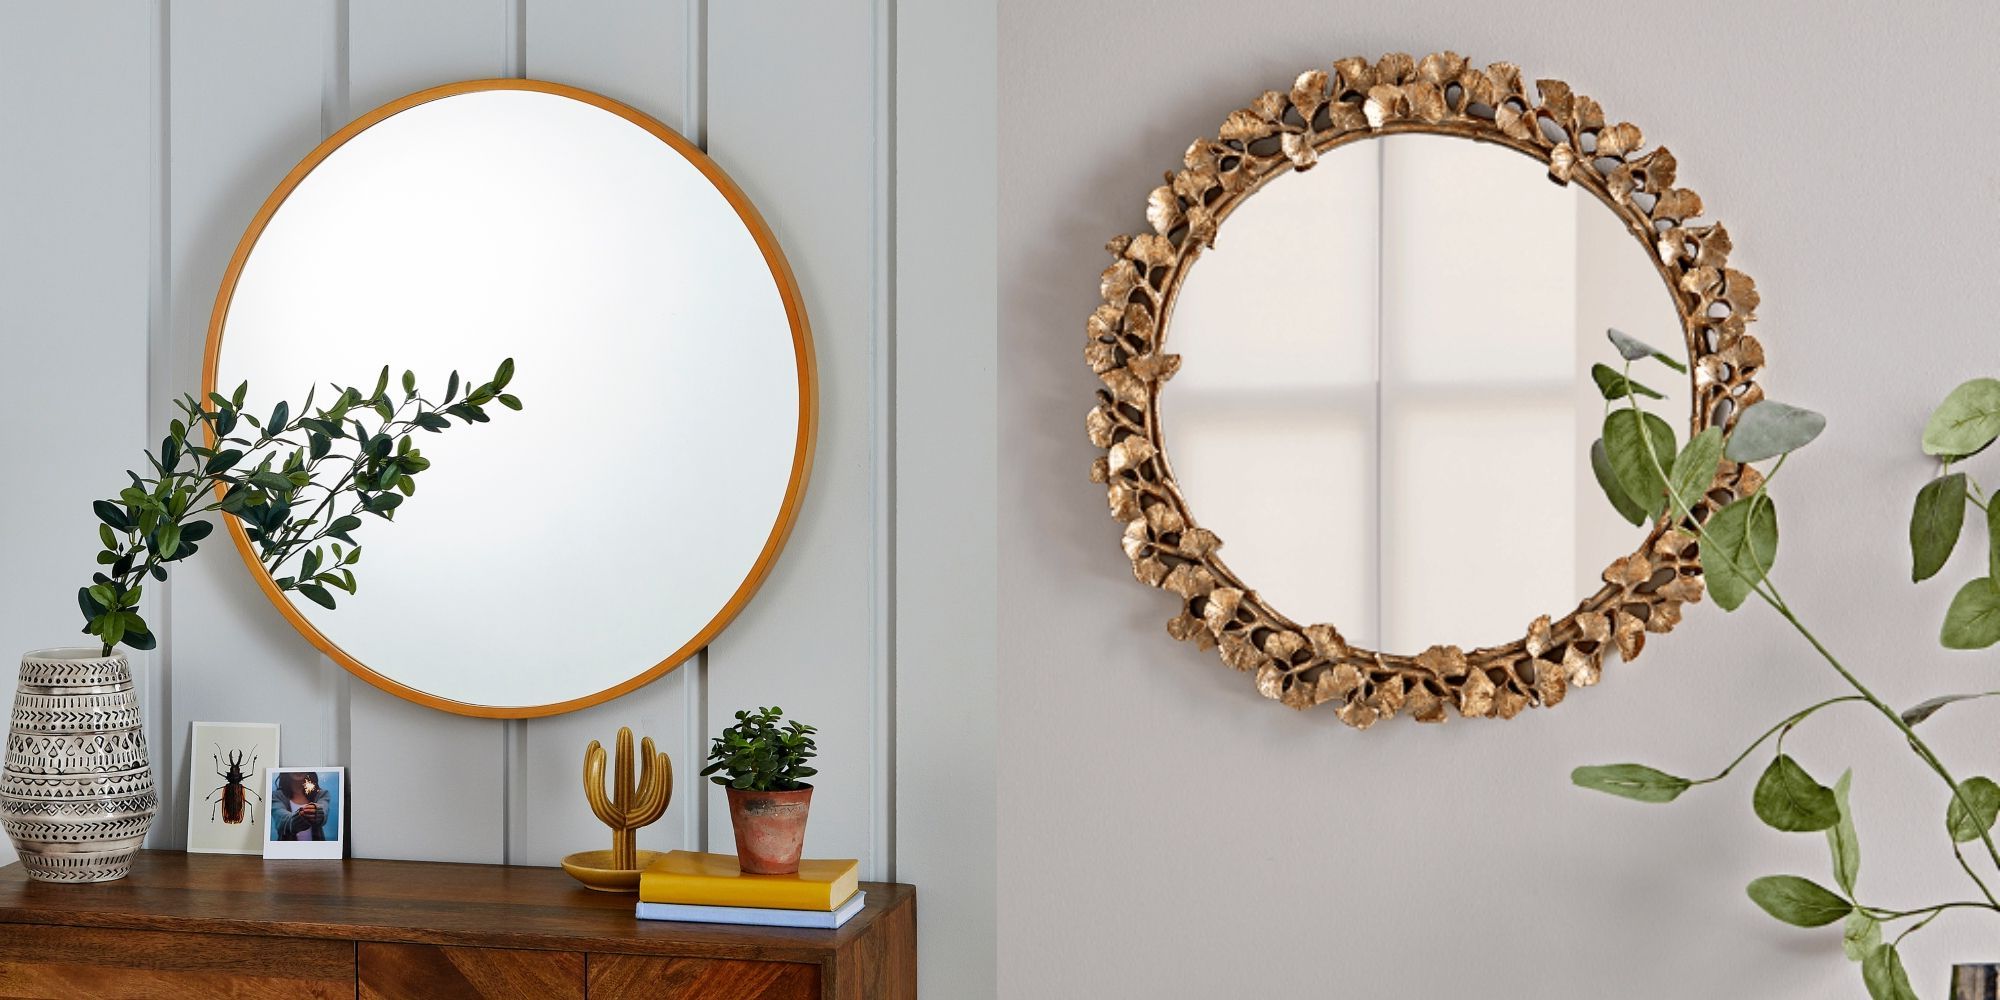 Newest Standard Wall Mirrors Regarding 7 Statement Round Wall Mirrors To Buy For Your Home (View 4 of 20)